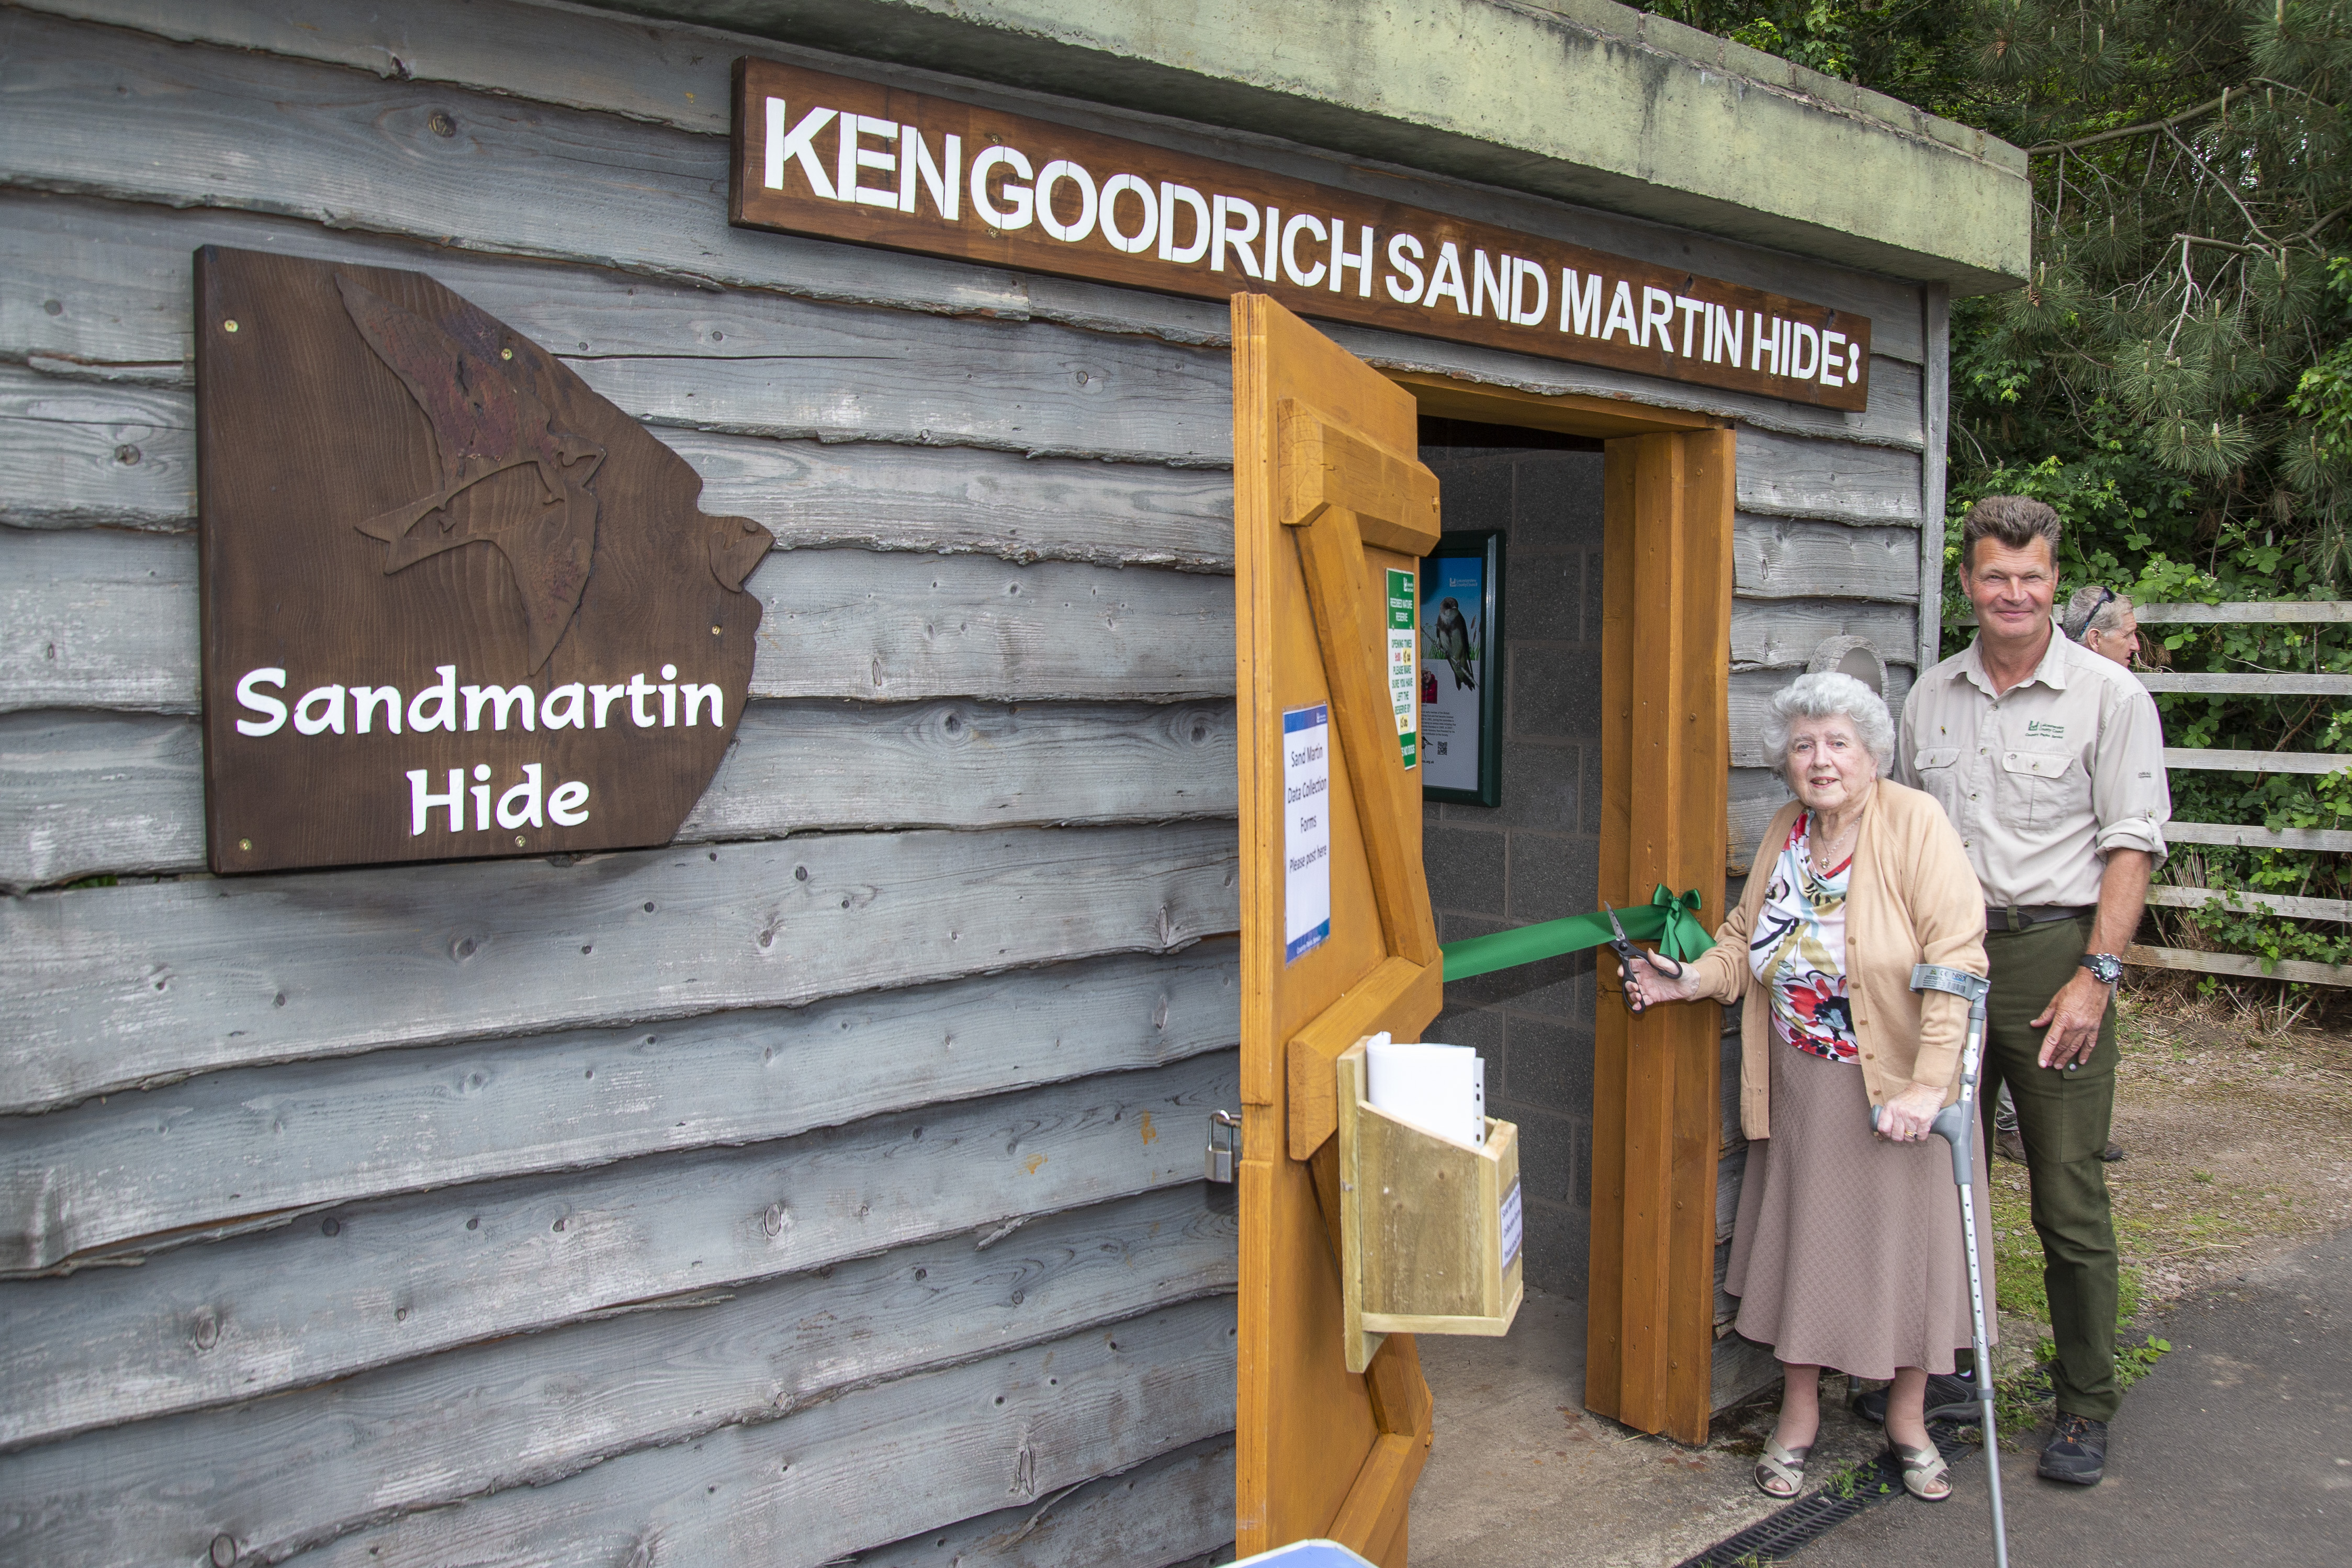 Opening of the Ken Goodrich Sandmartin hide at Watermead Country Park